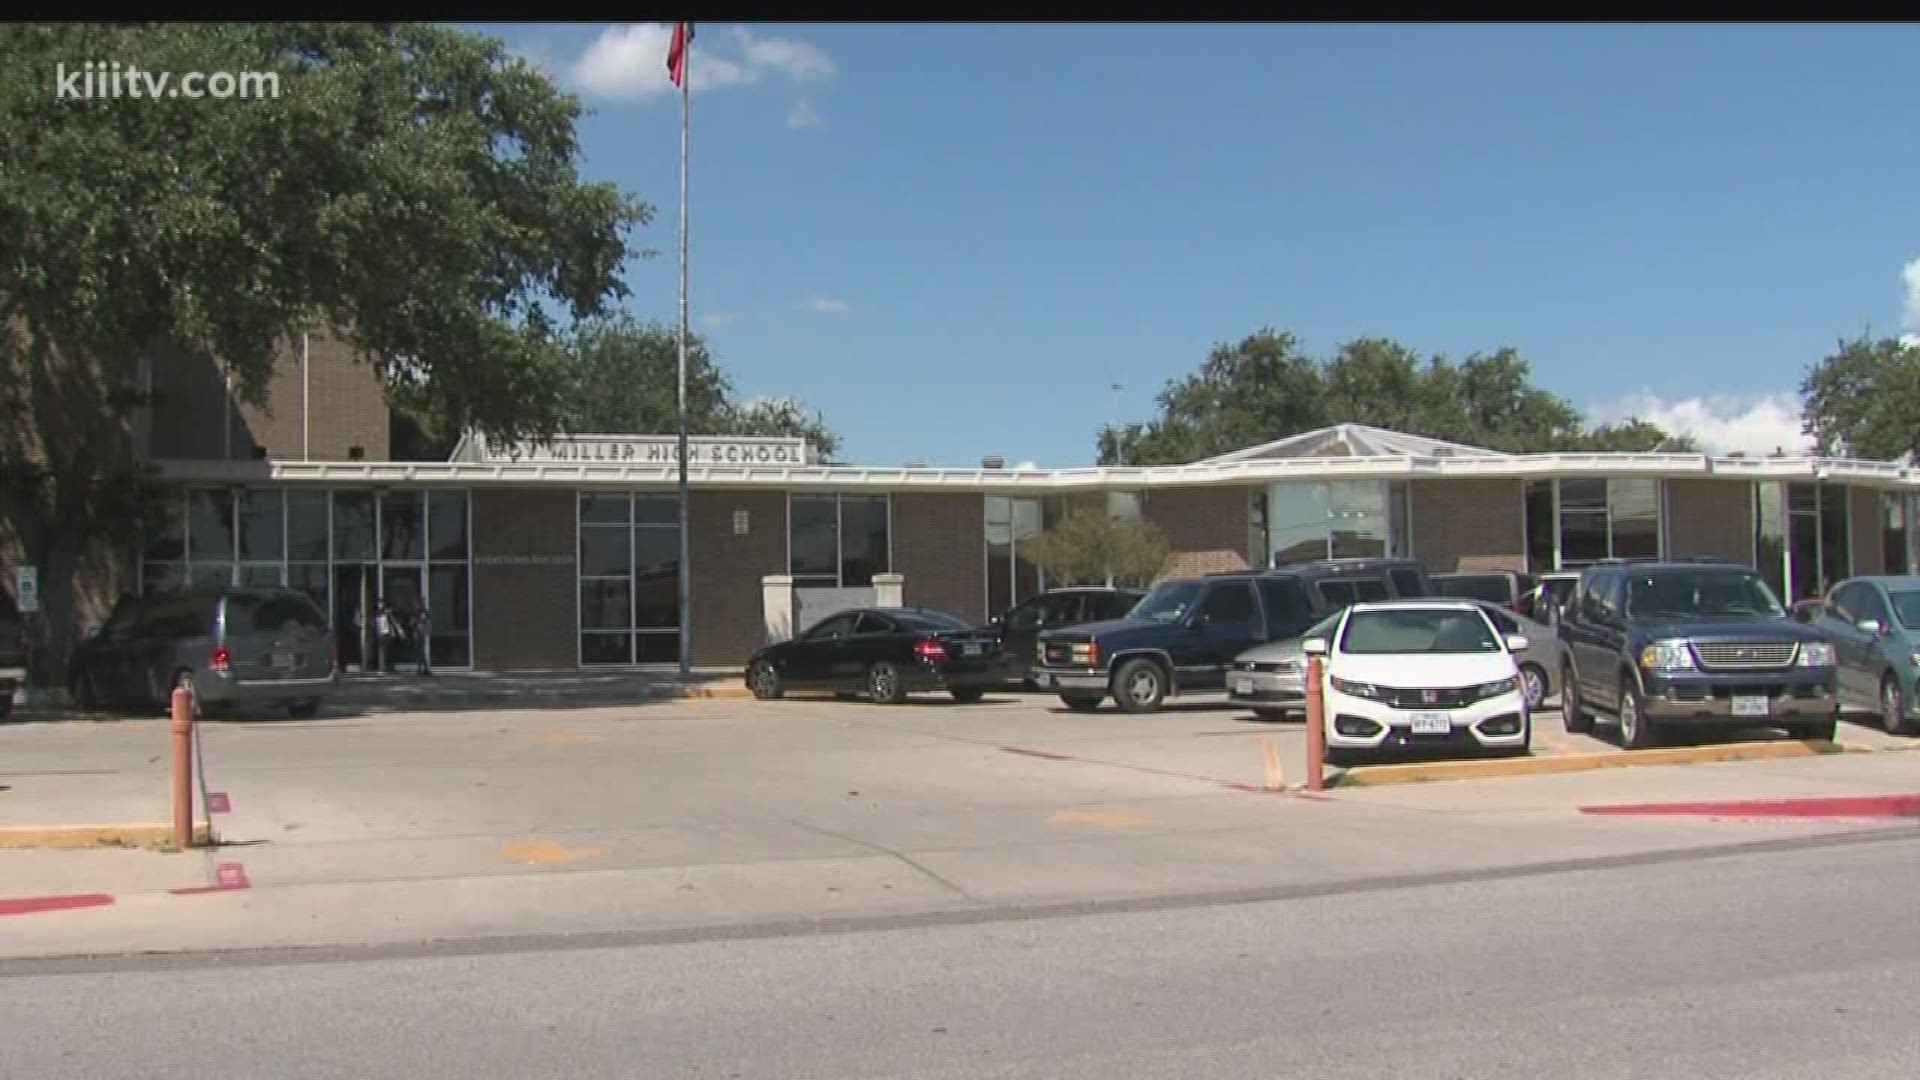 Authorities worked to translate the mumbled phone call and determined that the caller was referring to a school in San Antonio.